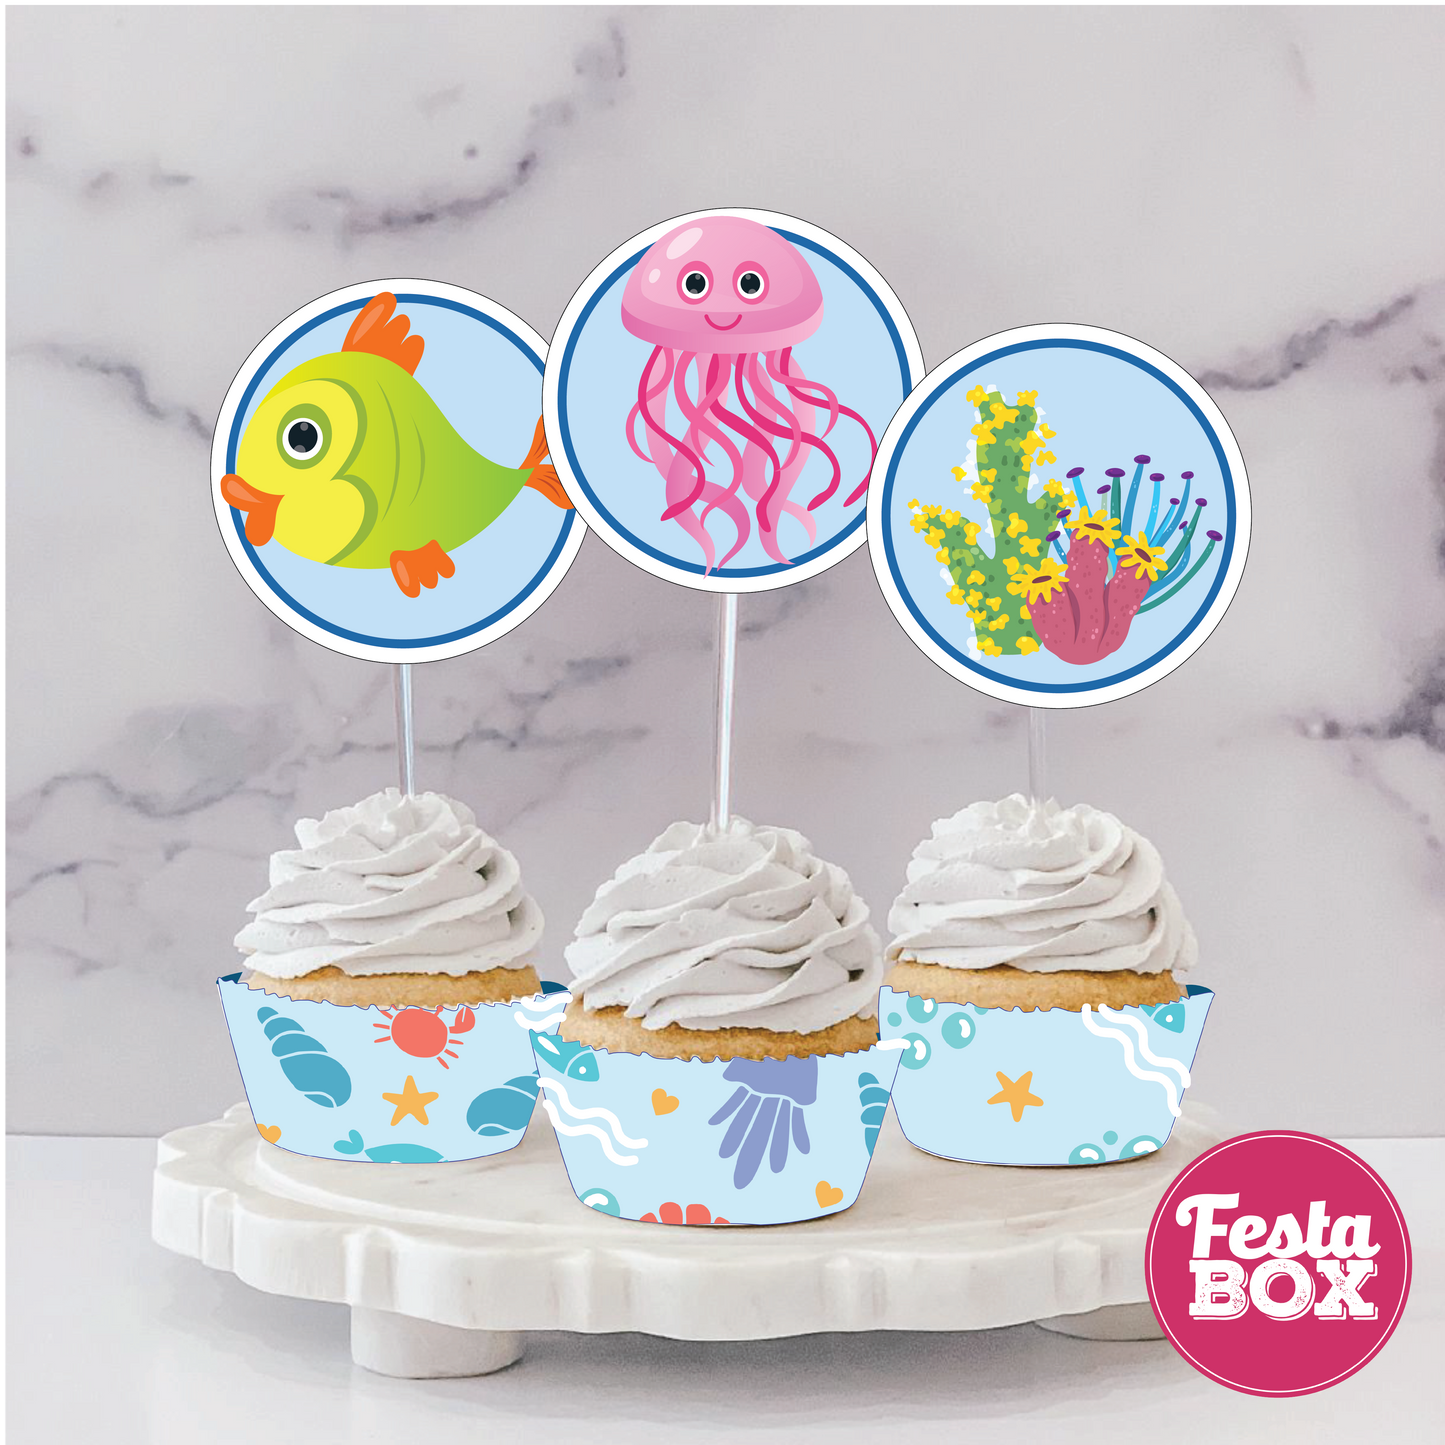 Cupcake Topper Birthday Party Decoration - Under the Sea Theme (Set of 6) - Assorted - Option 2